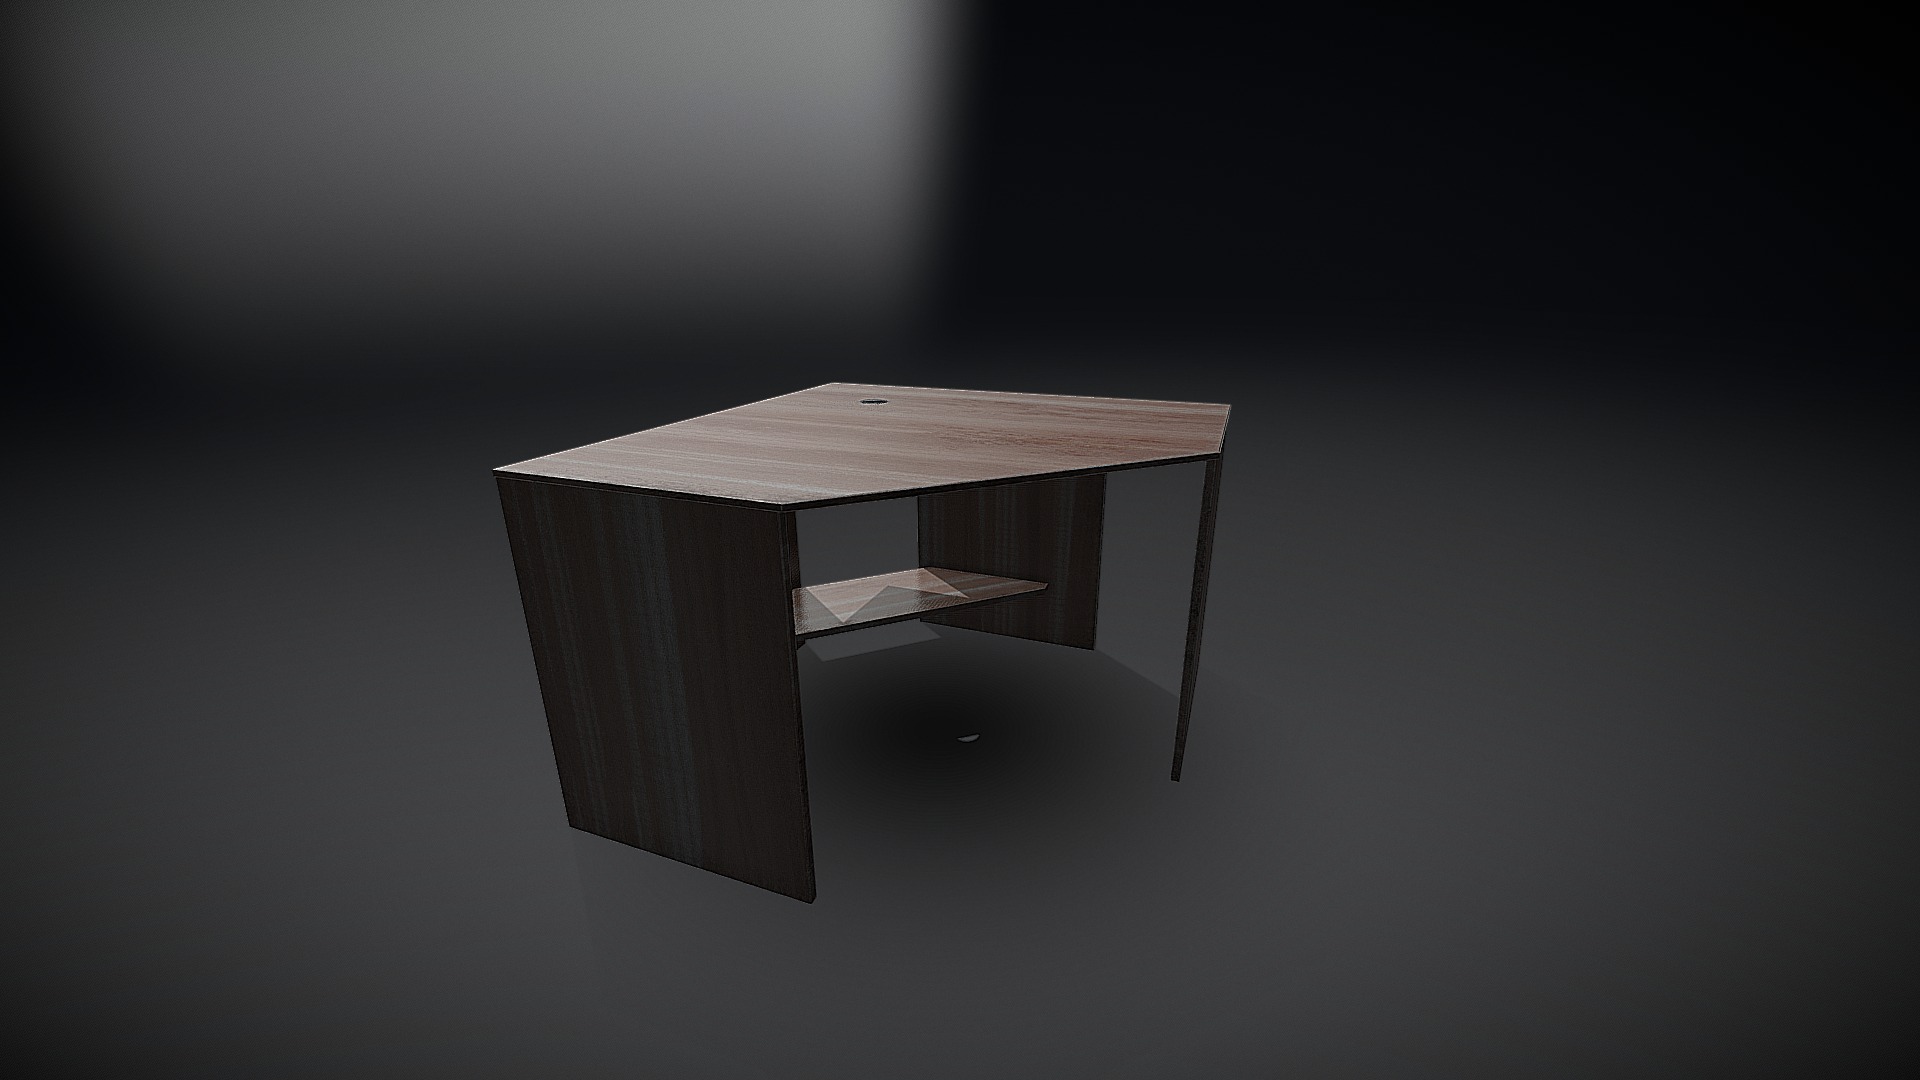 3D model Сorner table_1 - This is a 3D model of the Сorner table_1. The 3D model is about a wooden table with a piece of paper on it.